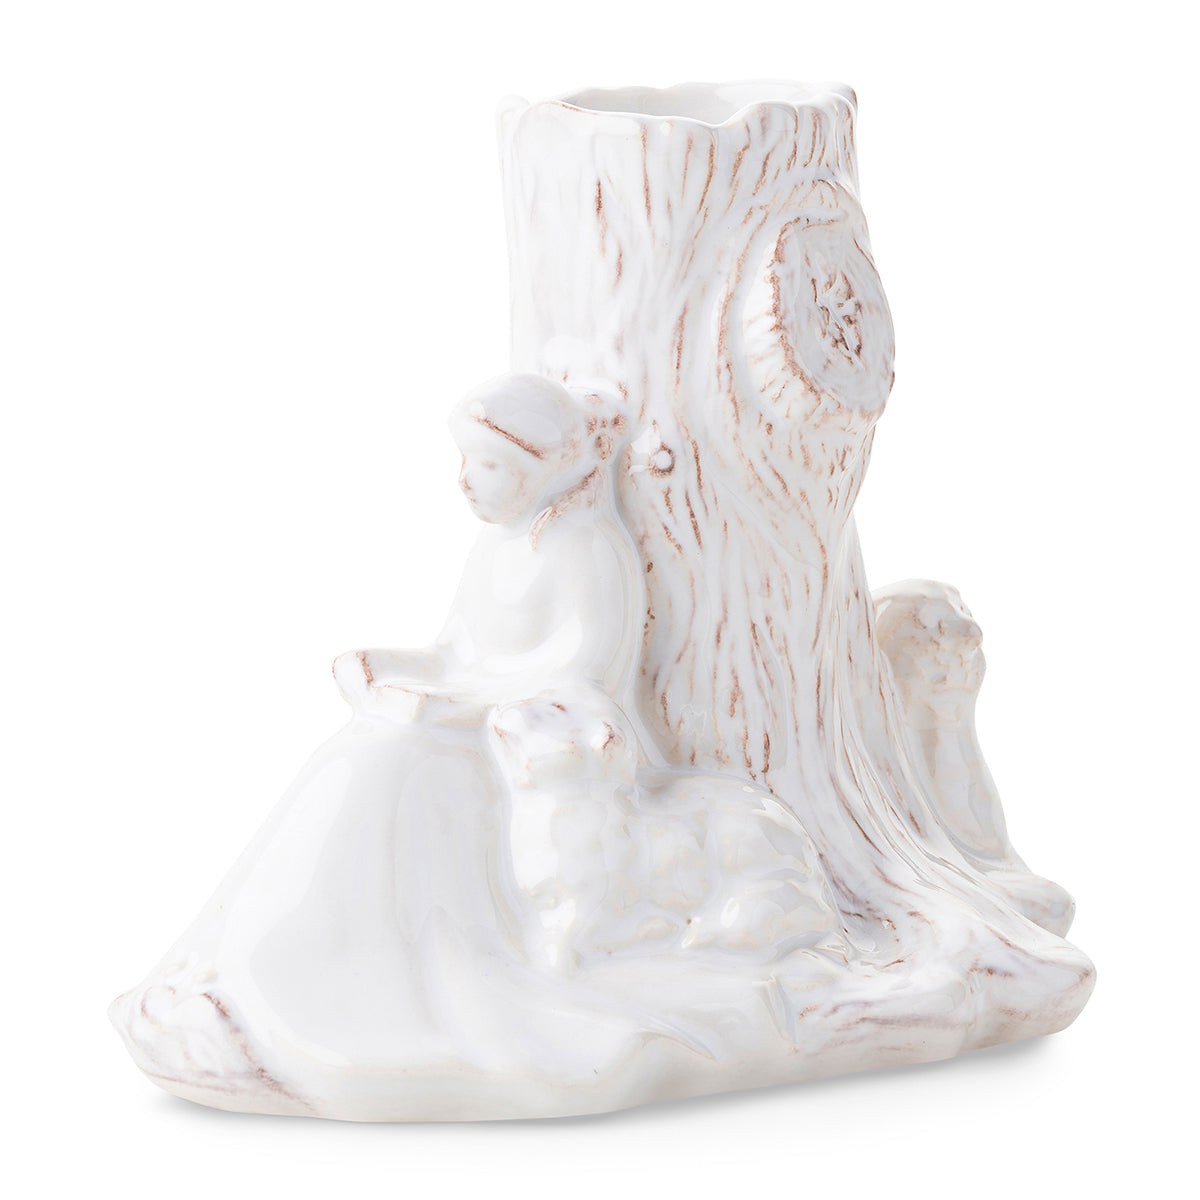 From our new Clever Creatures collection - this darling bud vase depicts an idyllic scene of a young girl reading in the countryside with a young lamb companion. Fill with a handful of wildflowers or colorful stems from your garden and place on a bedside table, bookshelf or down a mantle for a little touch of whimsy.